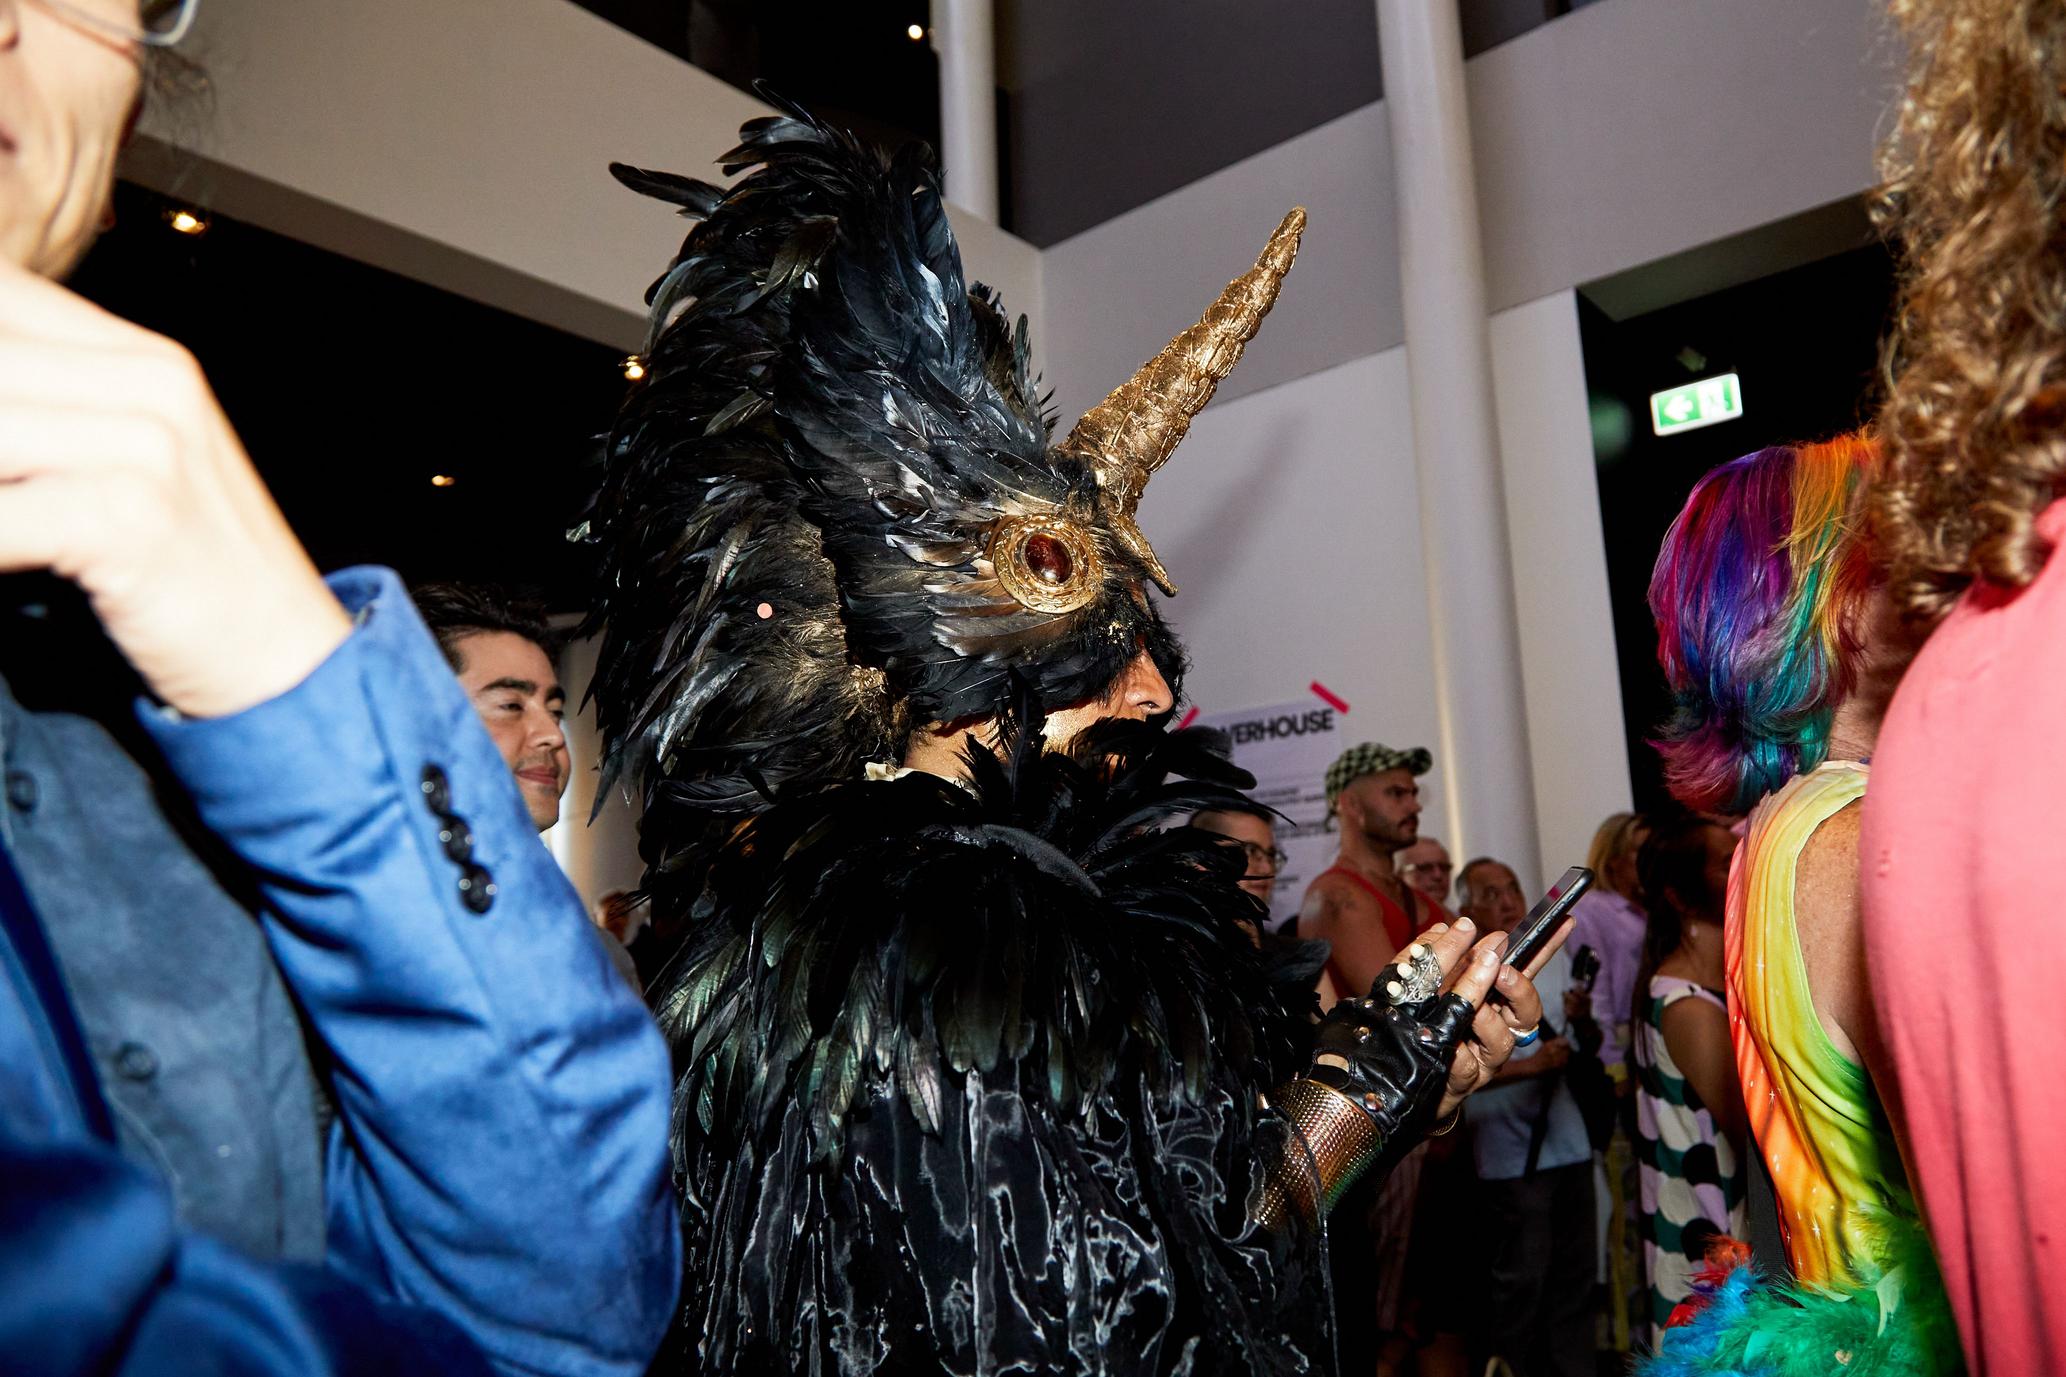 A man stands in a crowd watching a performance. He is wearing an embellished unicorn costume with black feathers, a gold horn and jewels.